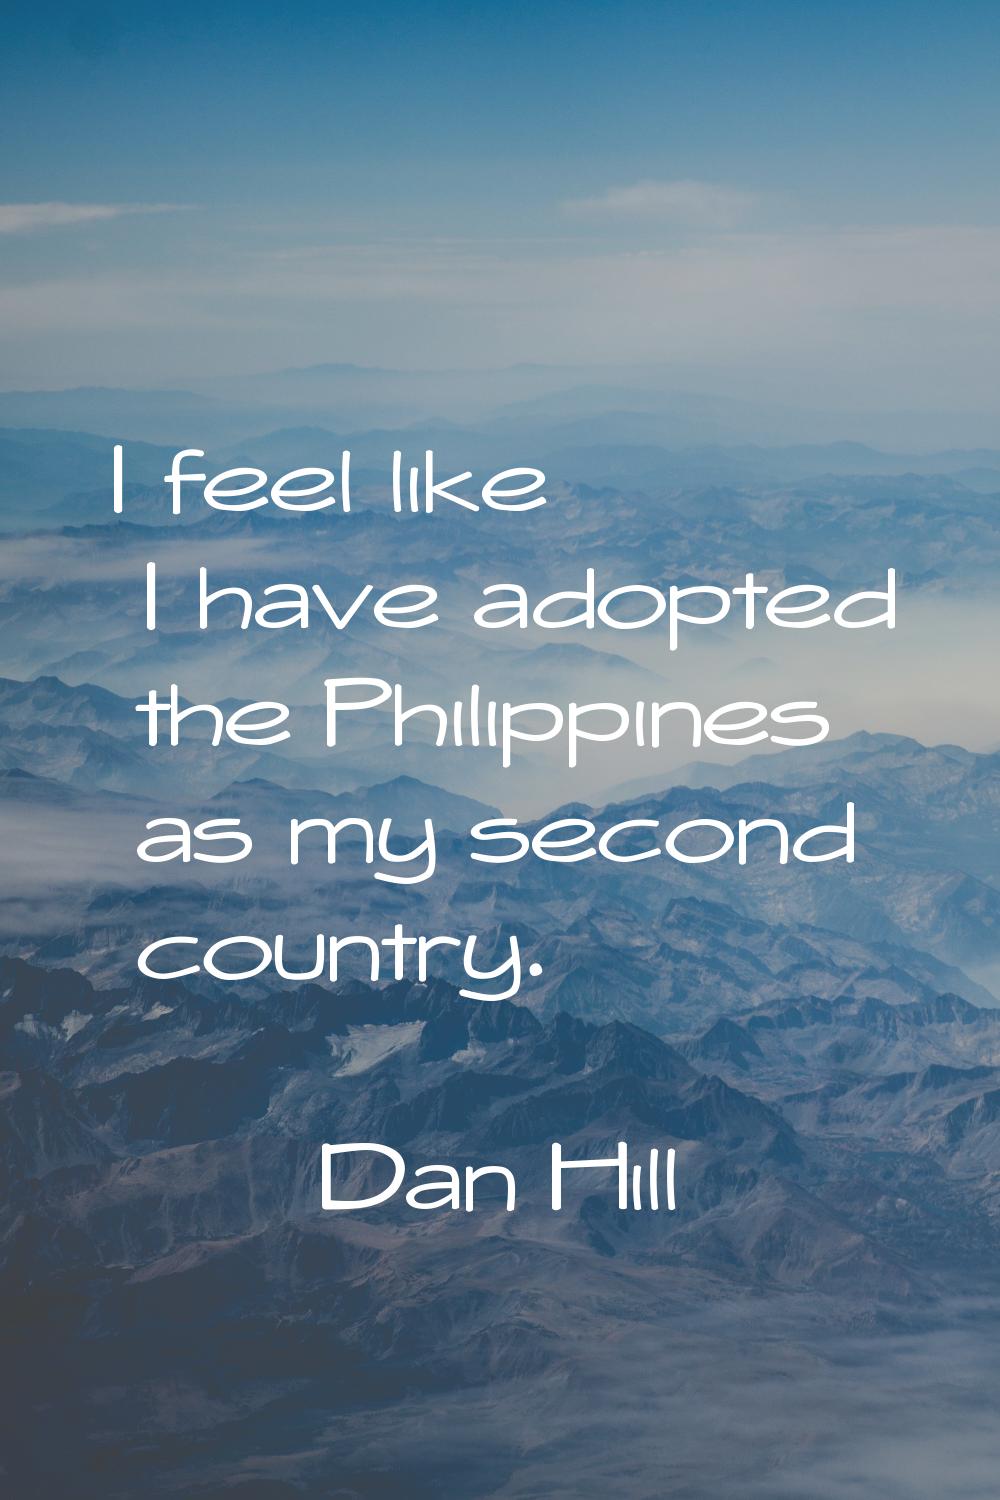 I feel like I have adopted the Philippines as my second country.